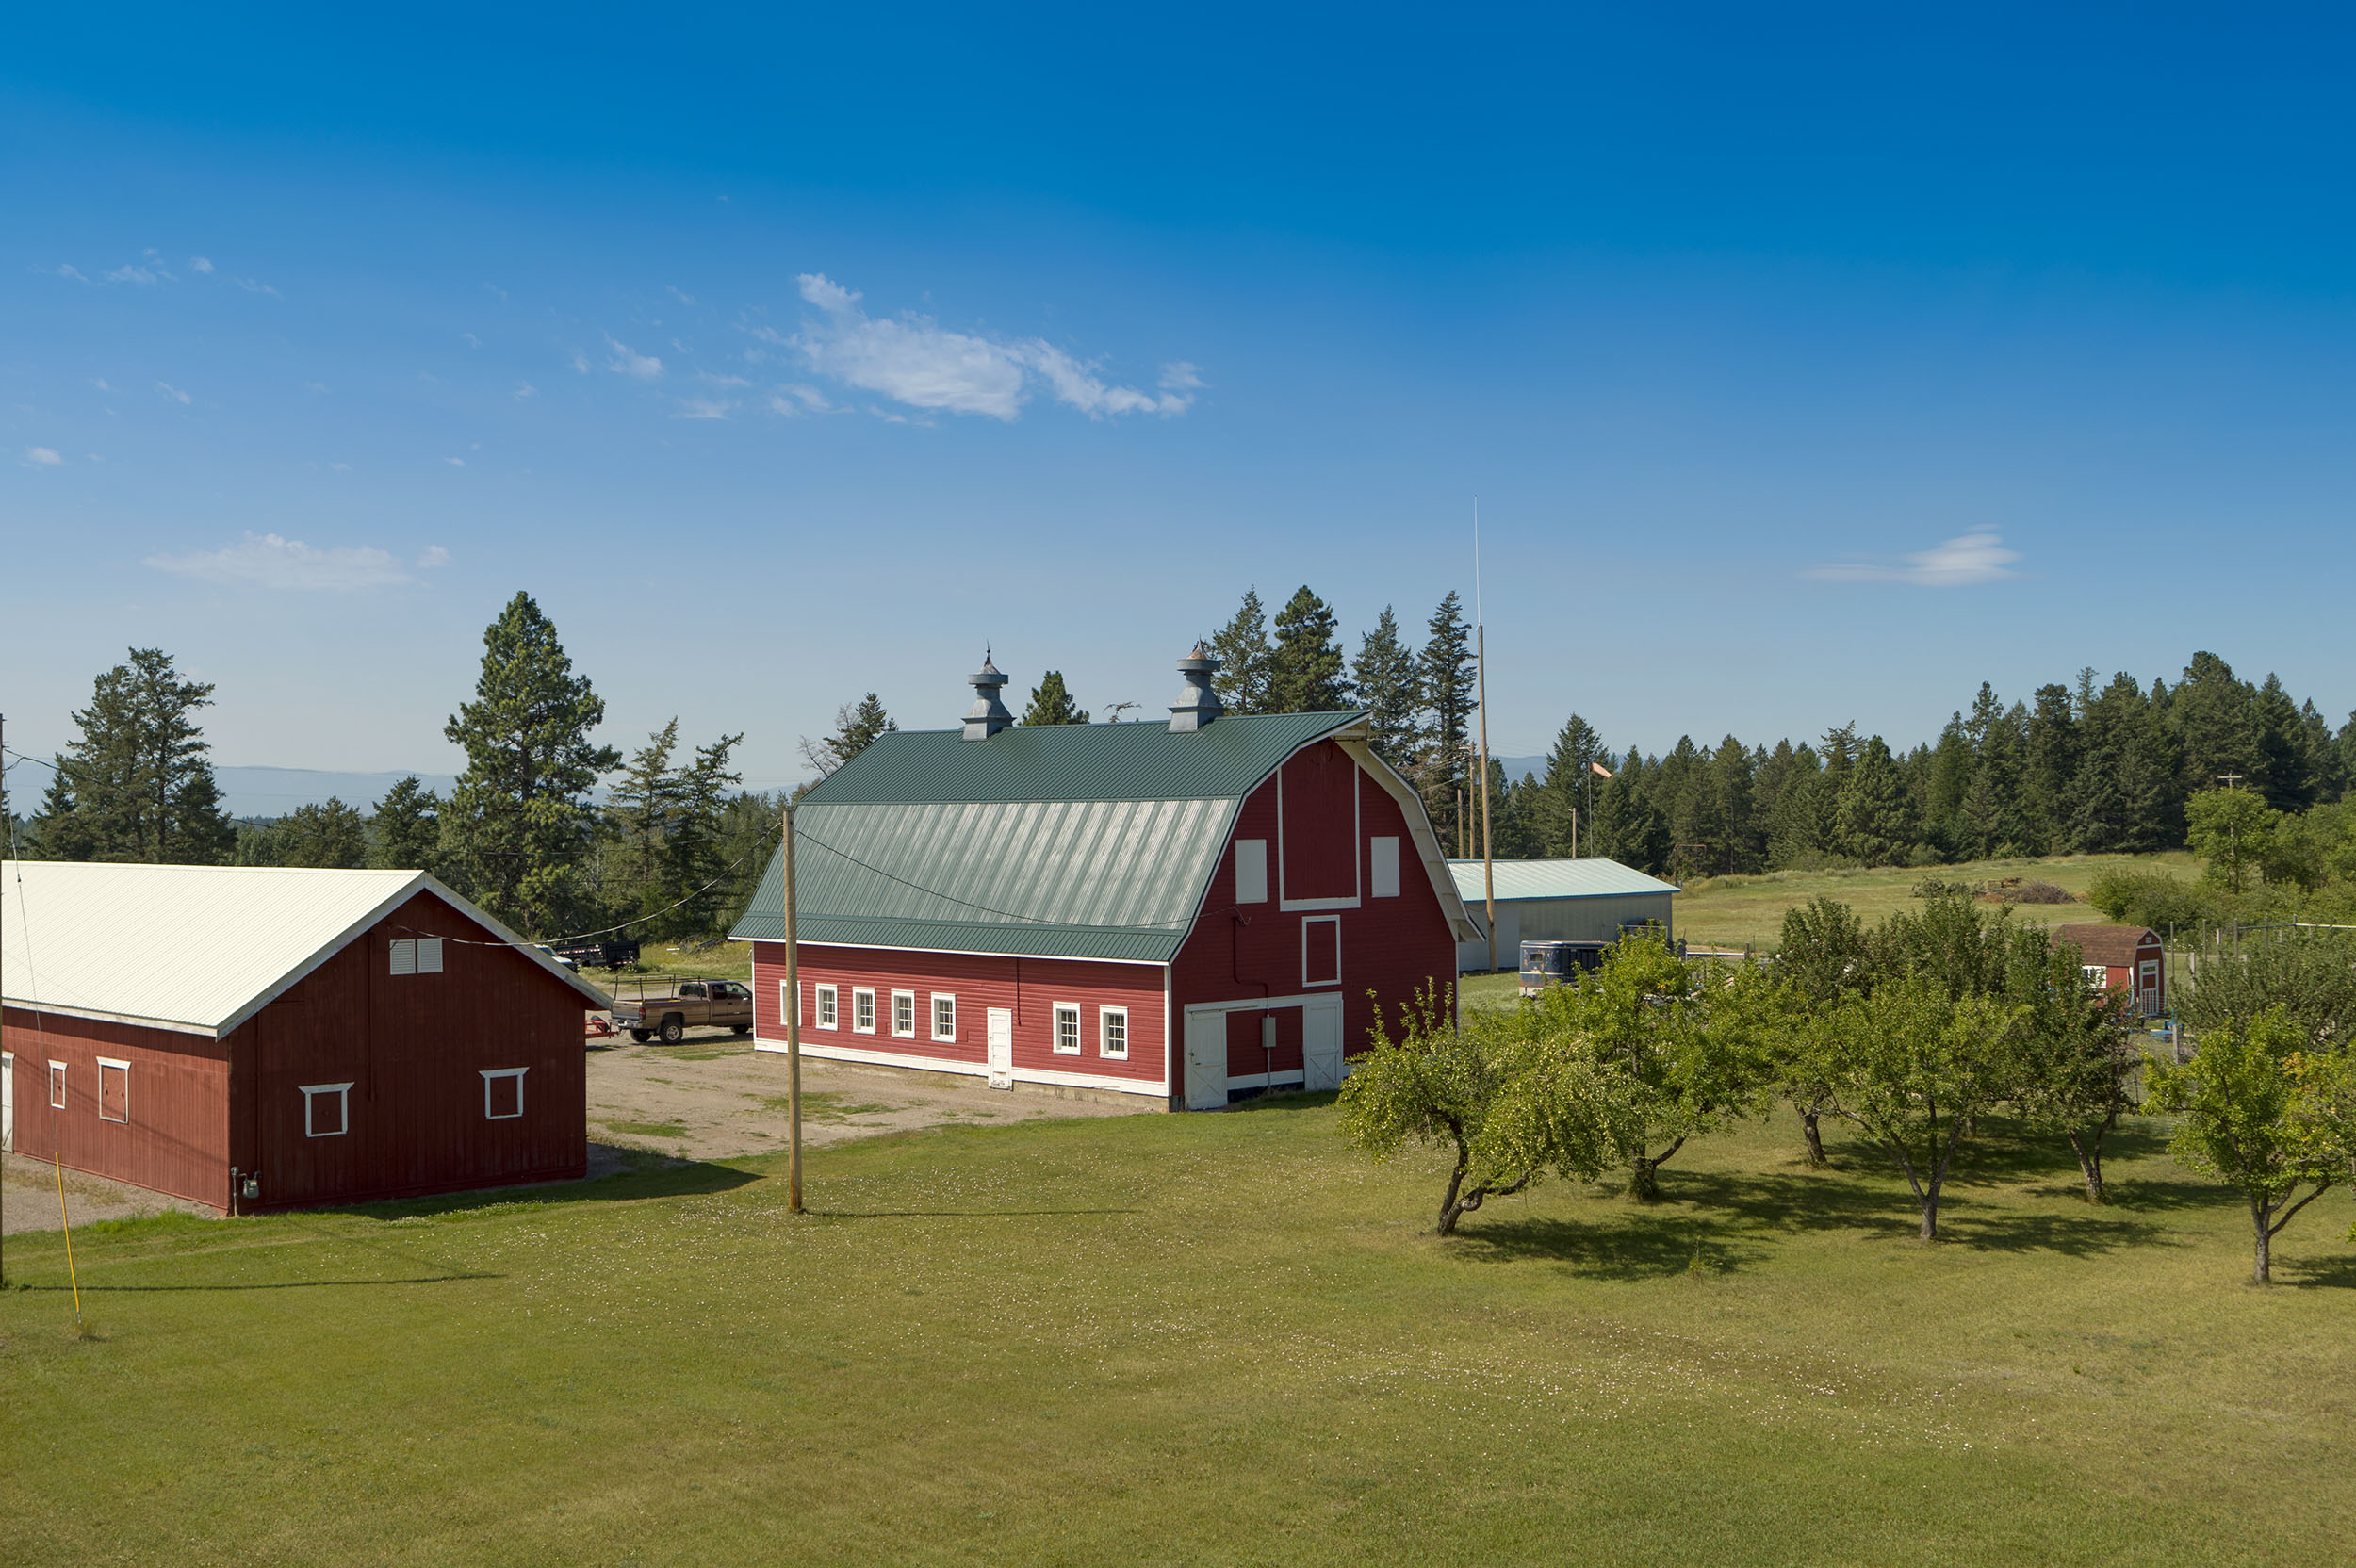 A picture of the barn on the Montana Veterans home grounds. It is surrounded by a large open green field with trees in the background.